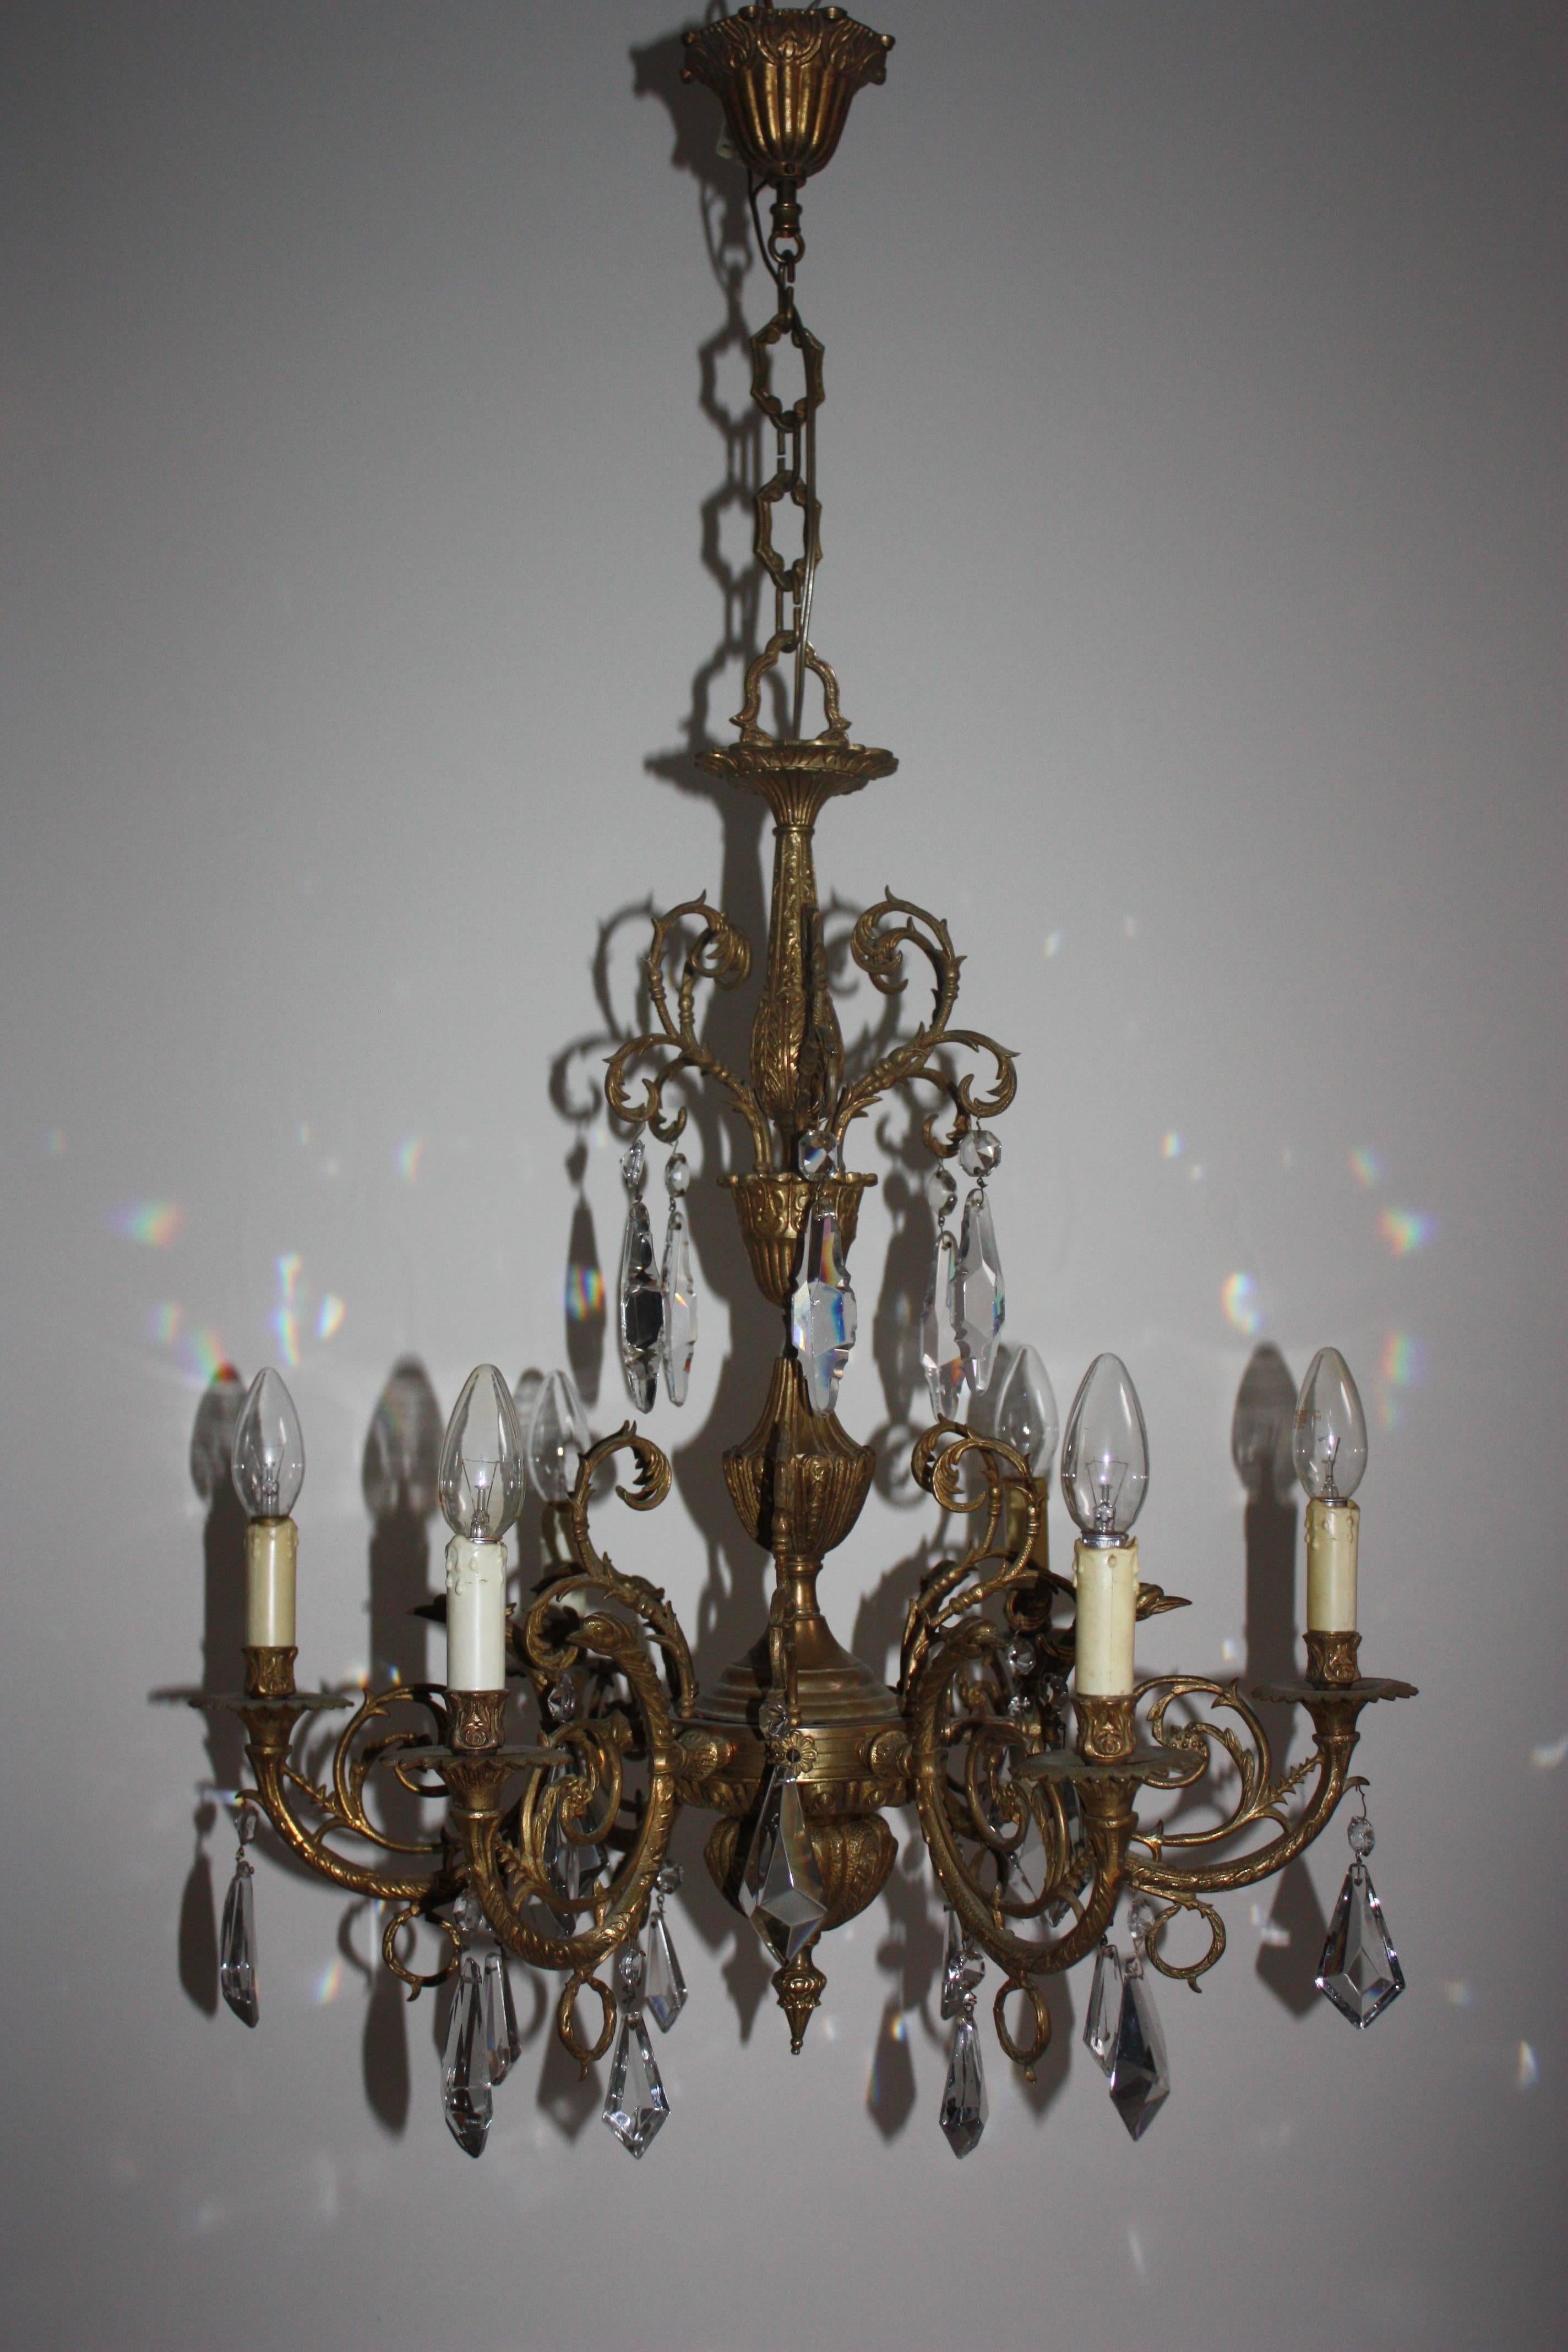 Neoclassical Antique Six-Light Bronze and Crystal Chandelier, circa 1930s